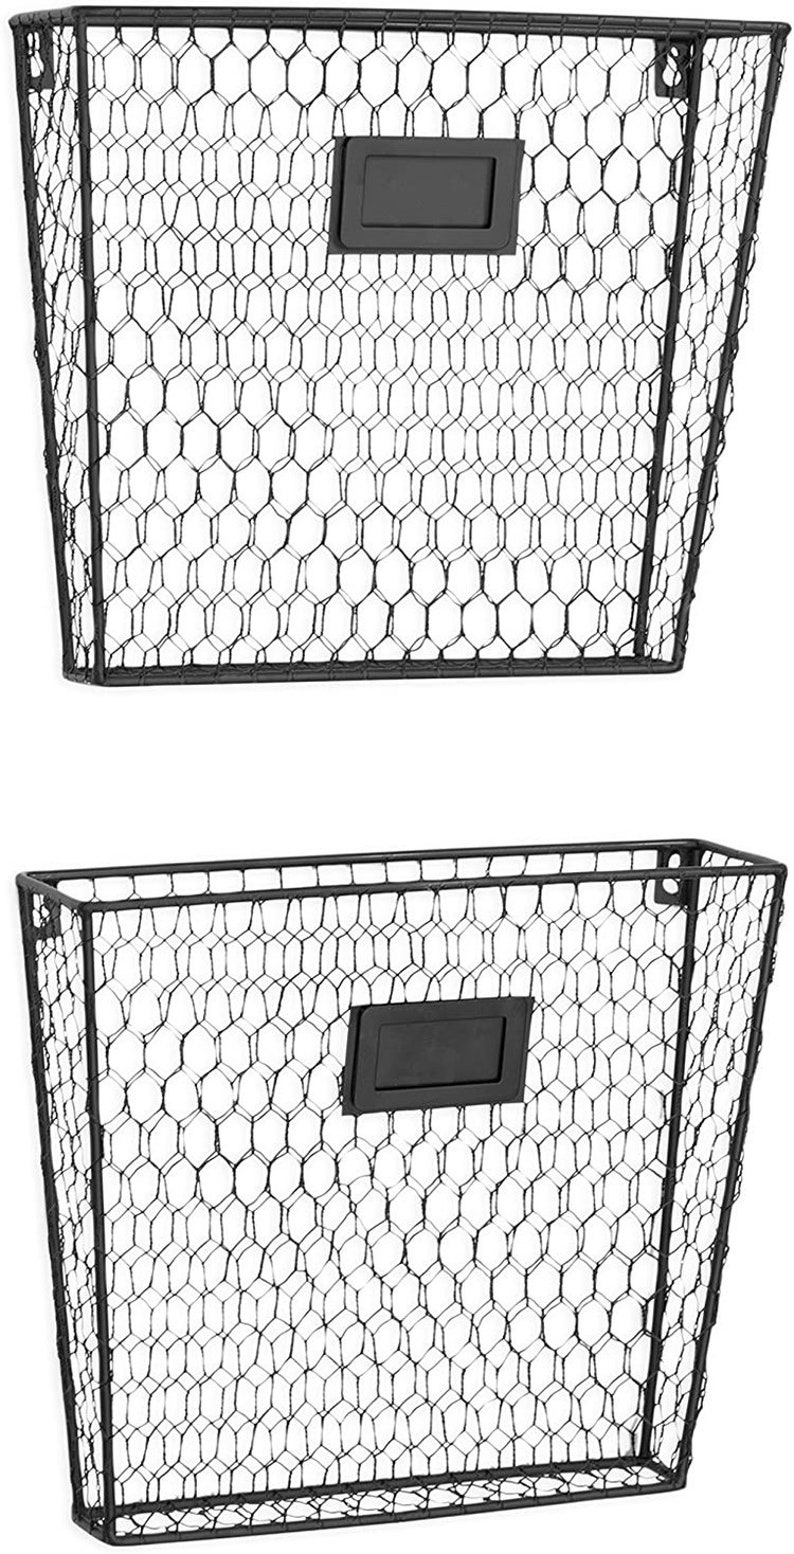 Set of 2 Wall Mounted Chicken Wire Magazine Organizer Rack with Chalkboard,Gray 